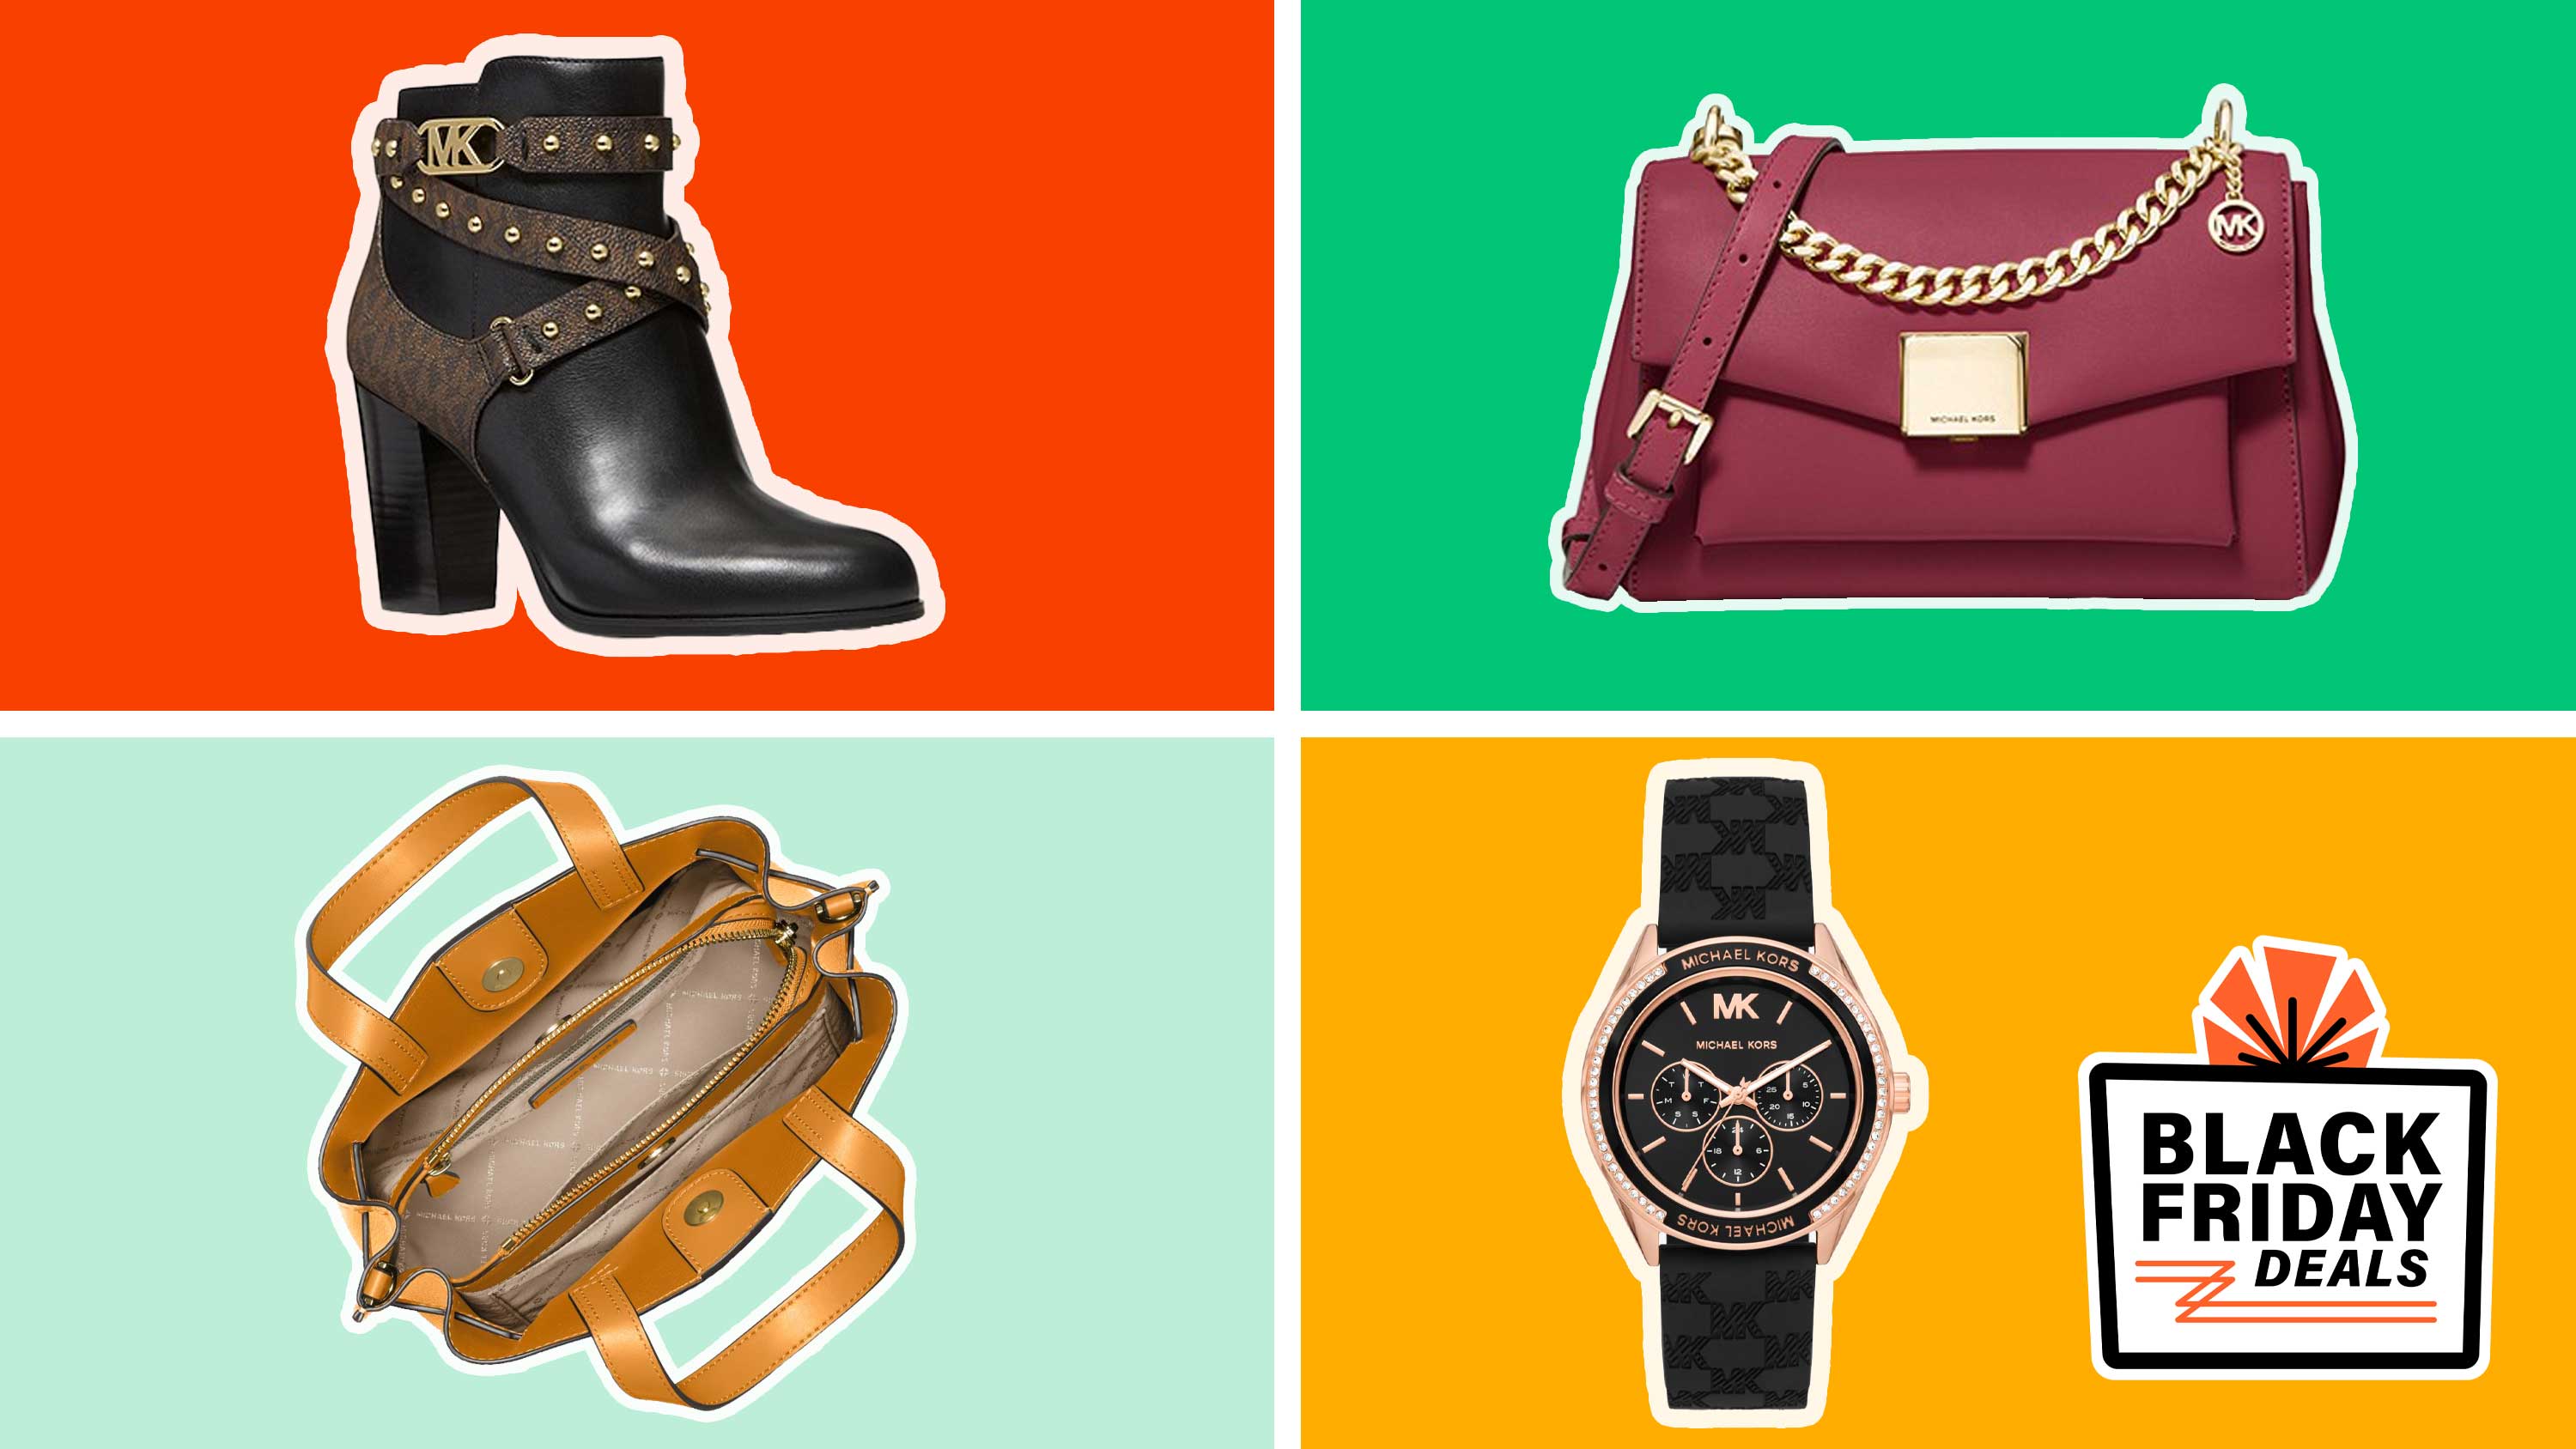 Michael Kors purse sale: Save on bags, watches, shoes for Black Friday